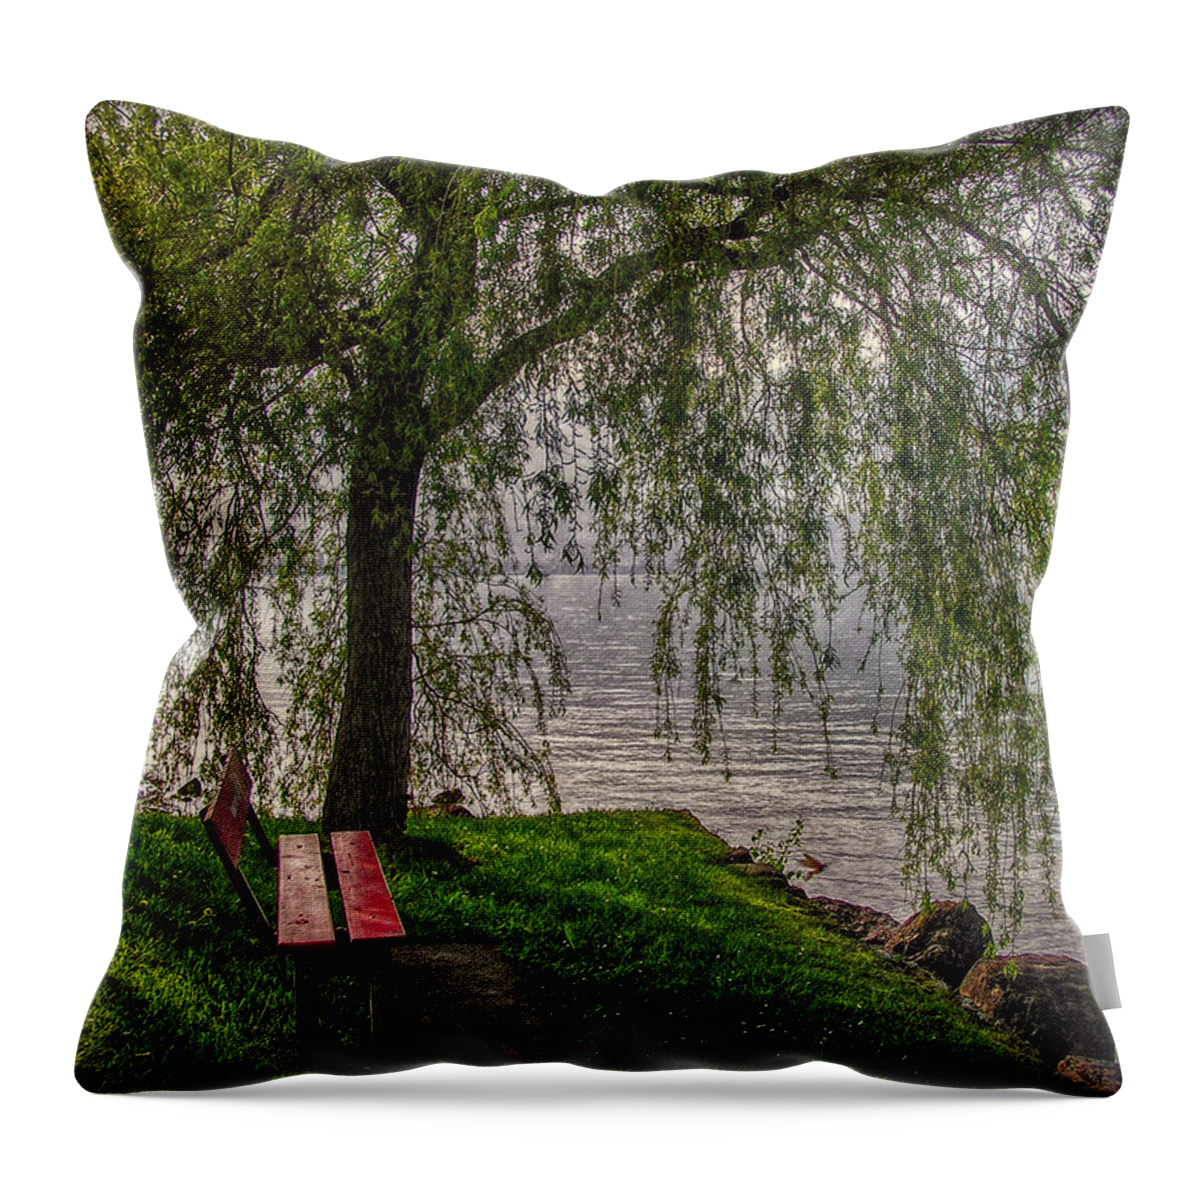 Switzerland Throw Pillow featuring the photograph Invitation to Rest by Hanny Heim